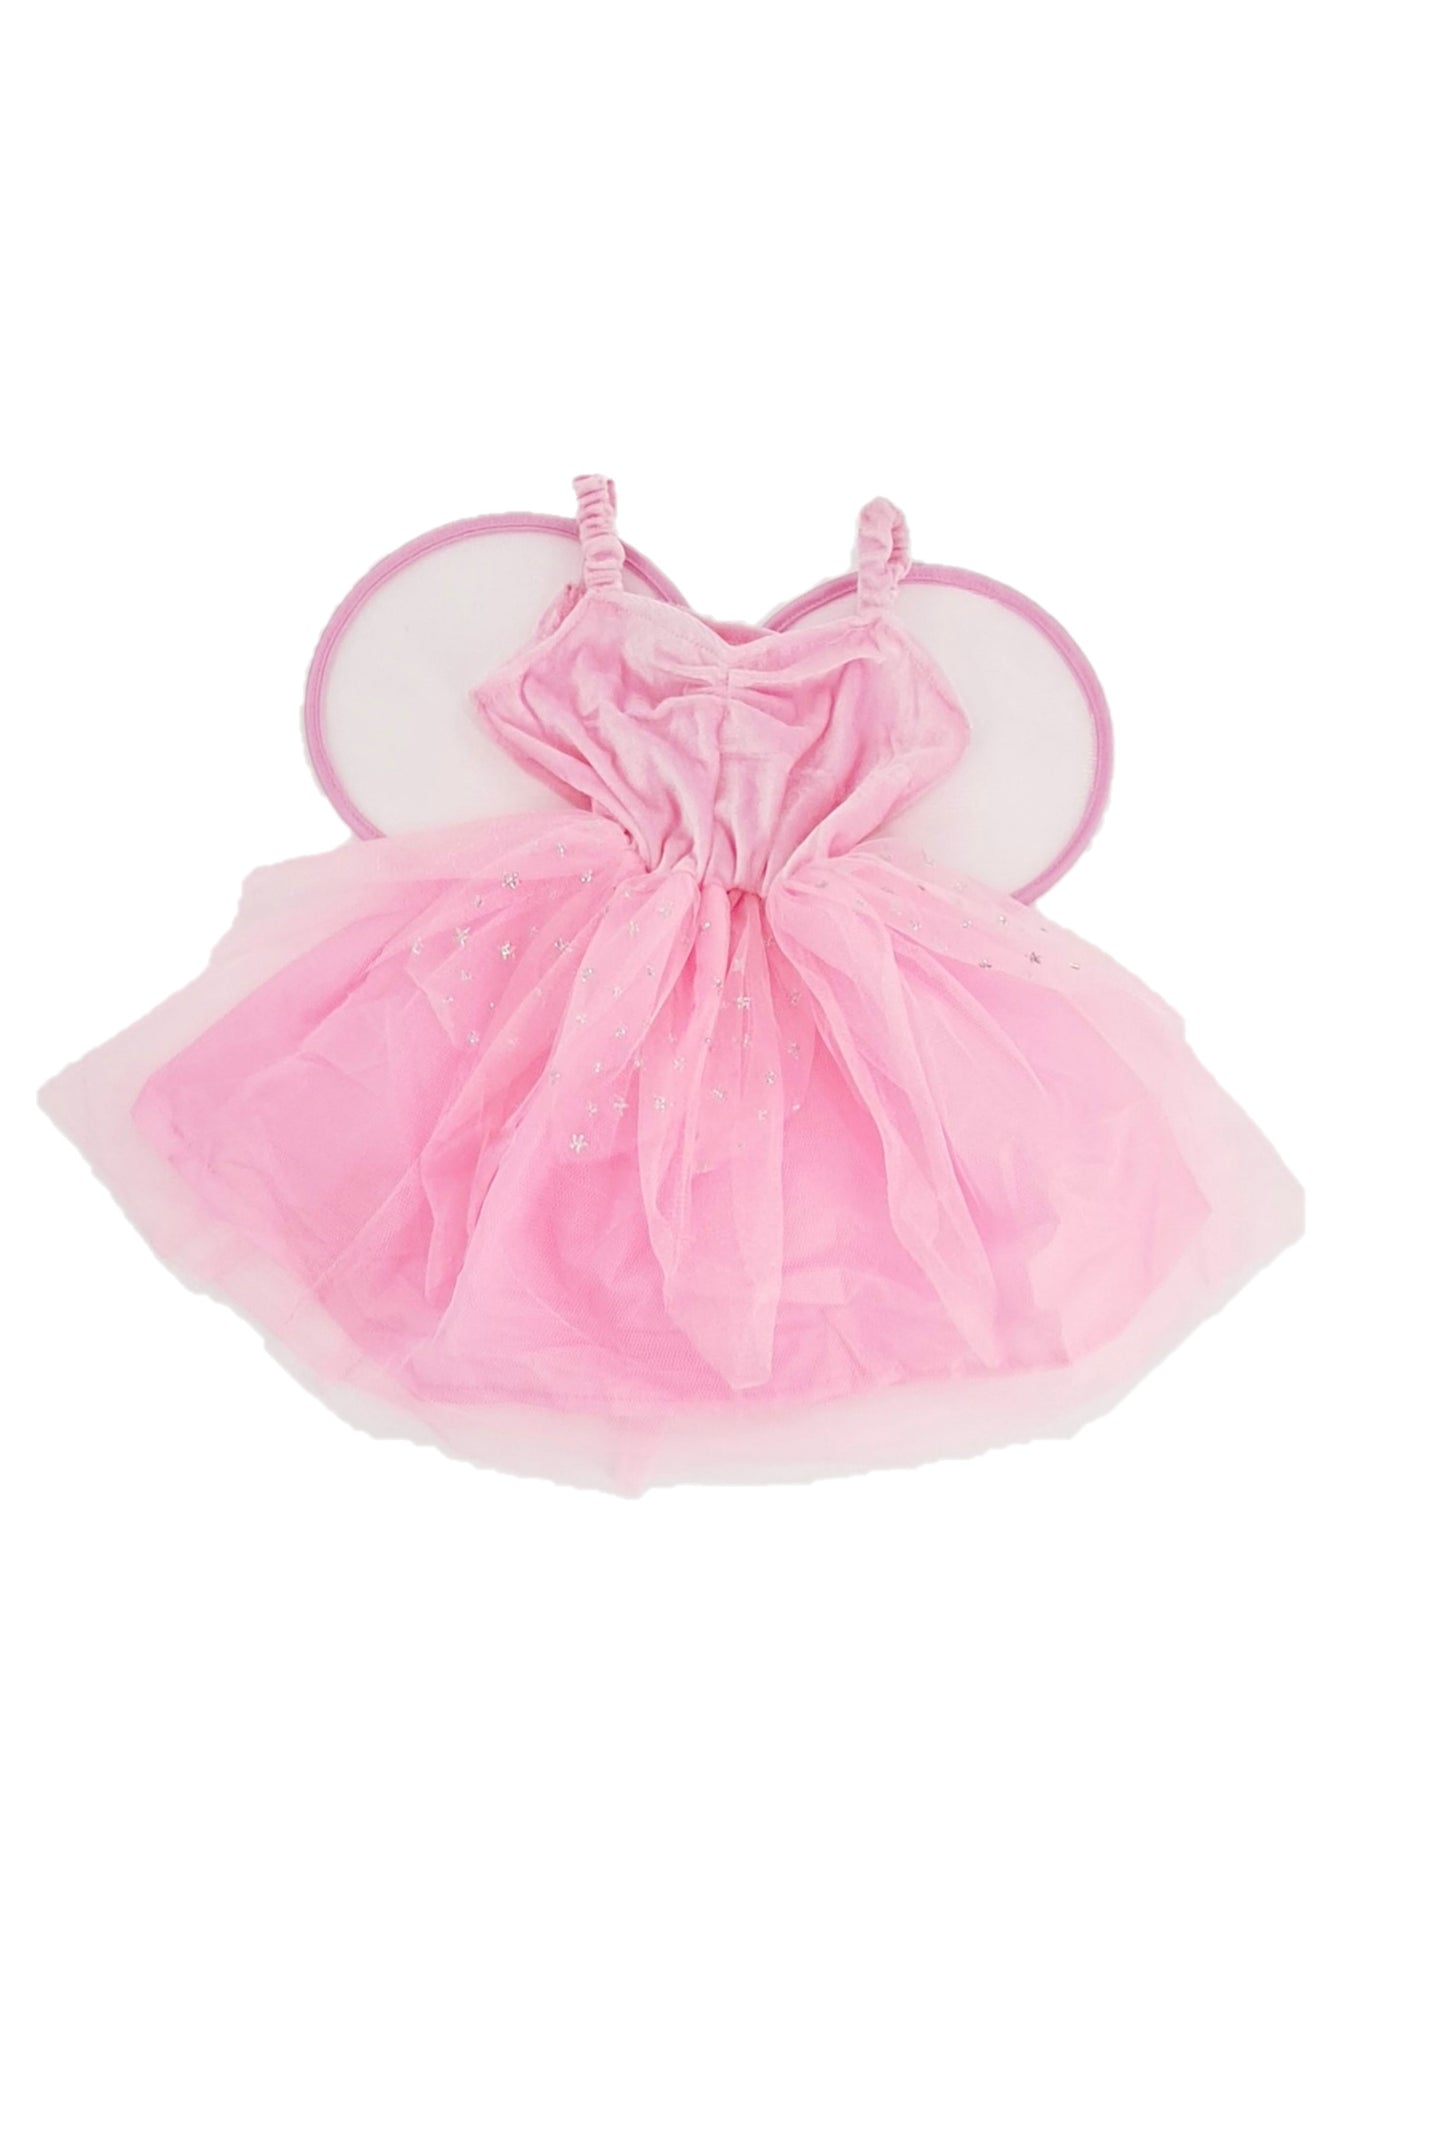 Girl’s Pink Toddler Fairy Fancy Dress Costume Age 2-3 Years